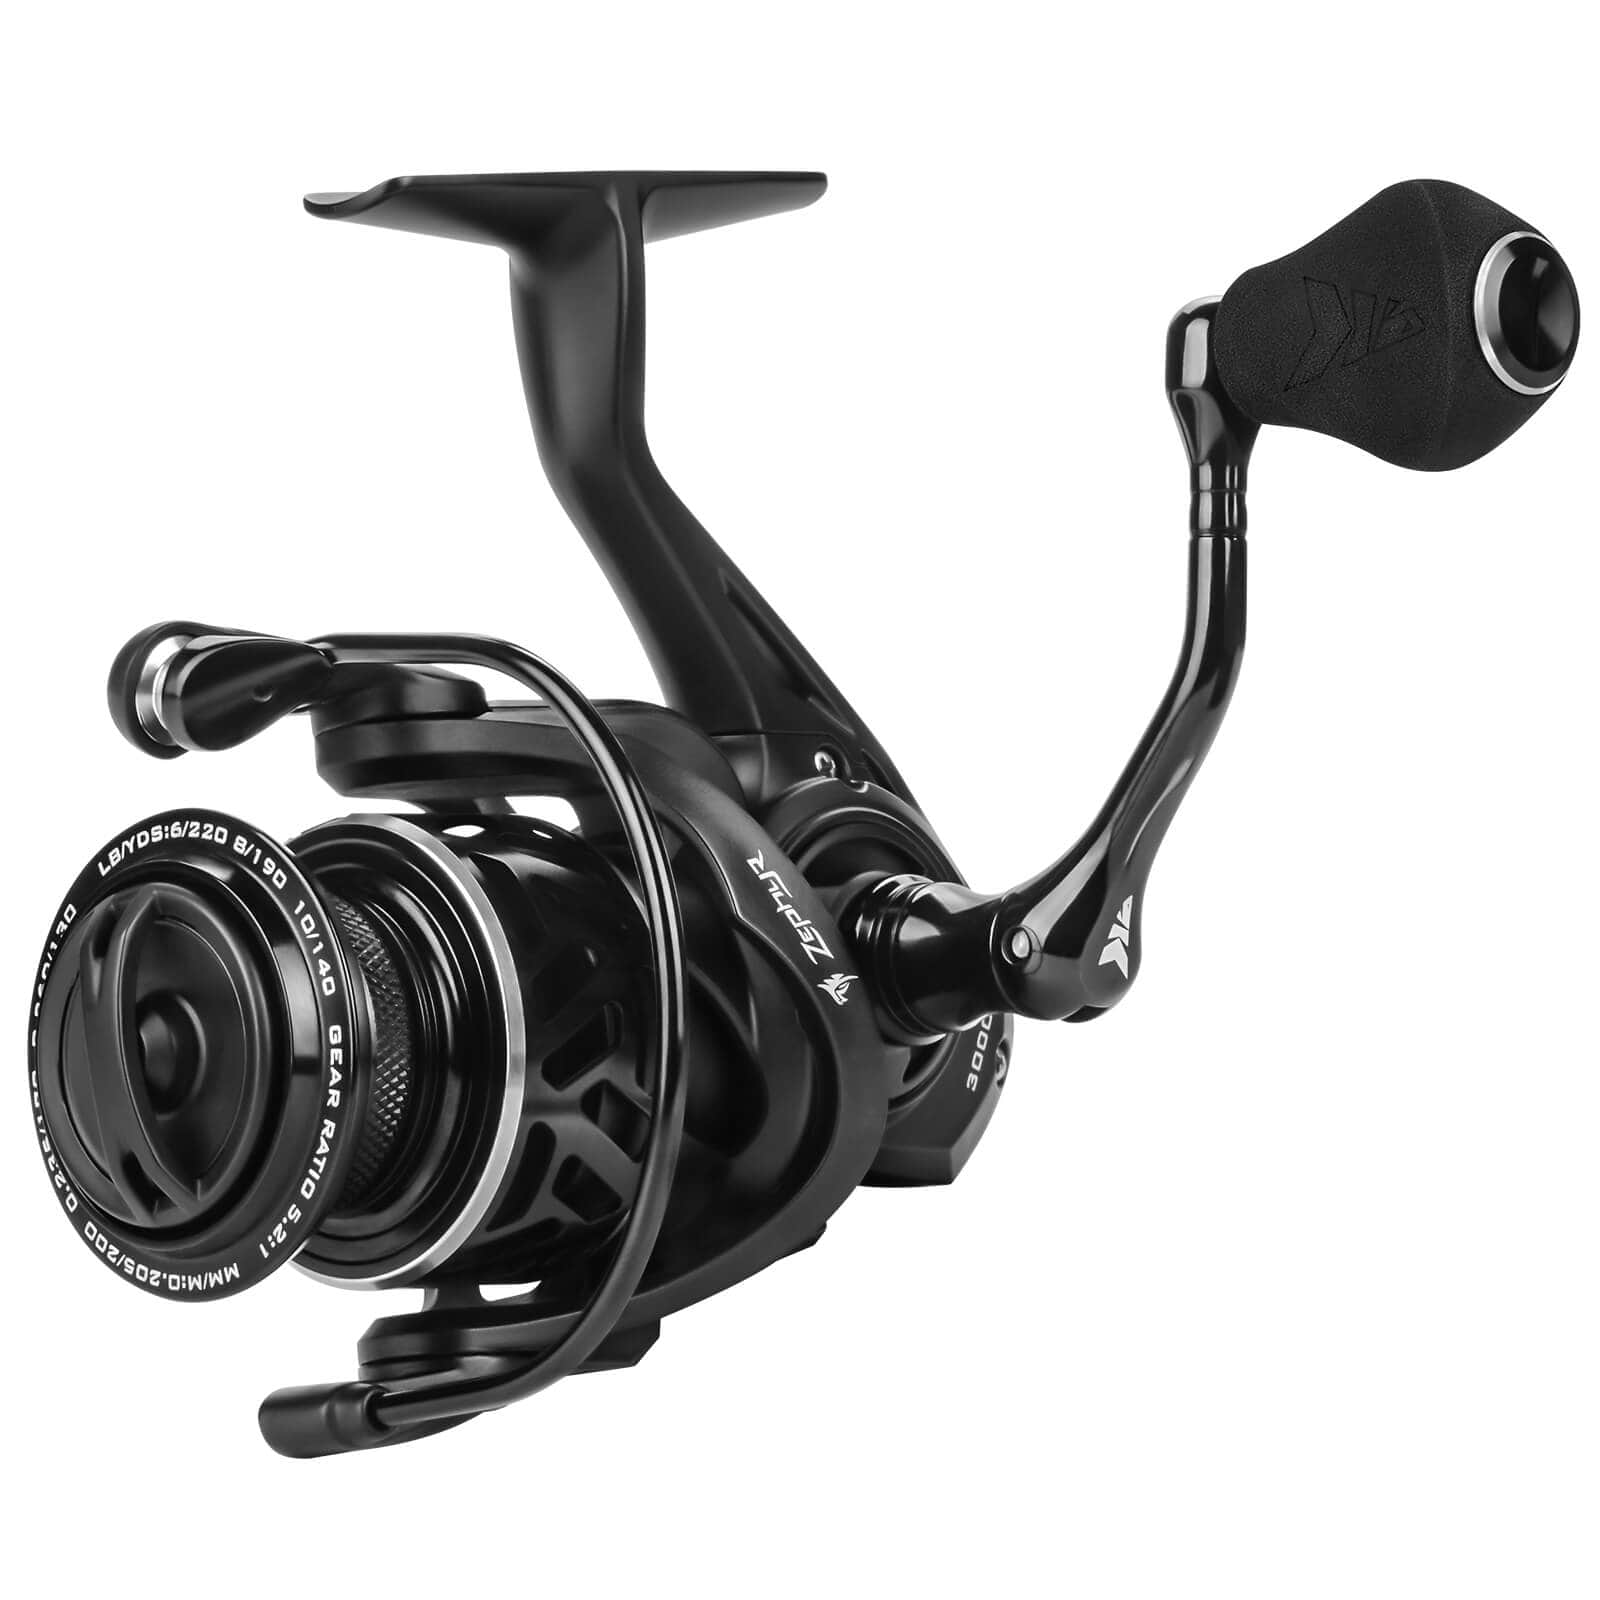 Experience Unmatched Performance with KastKing Brutus Spinning Reel